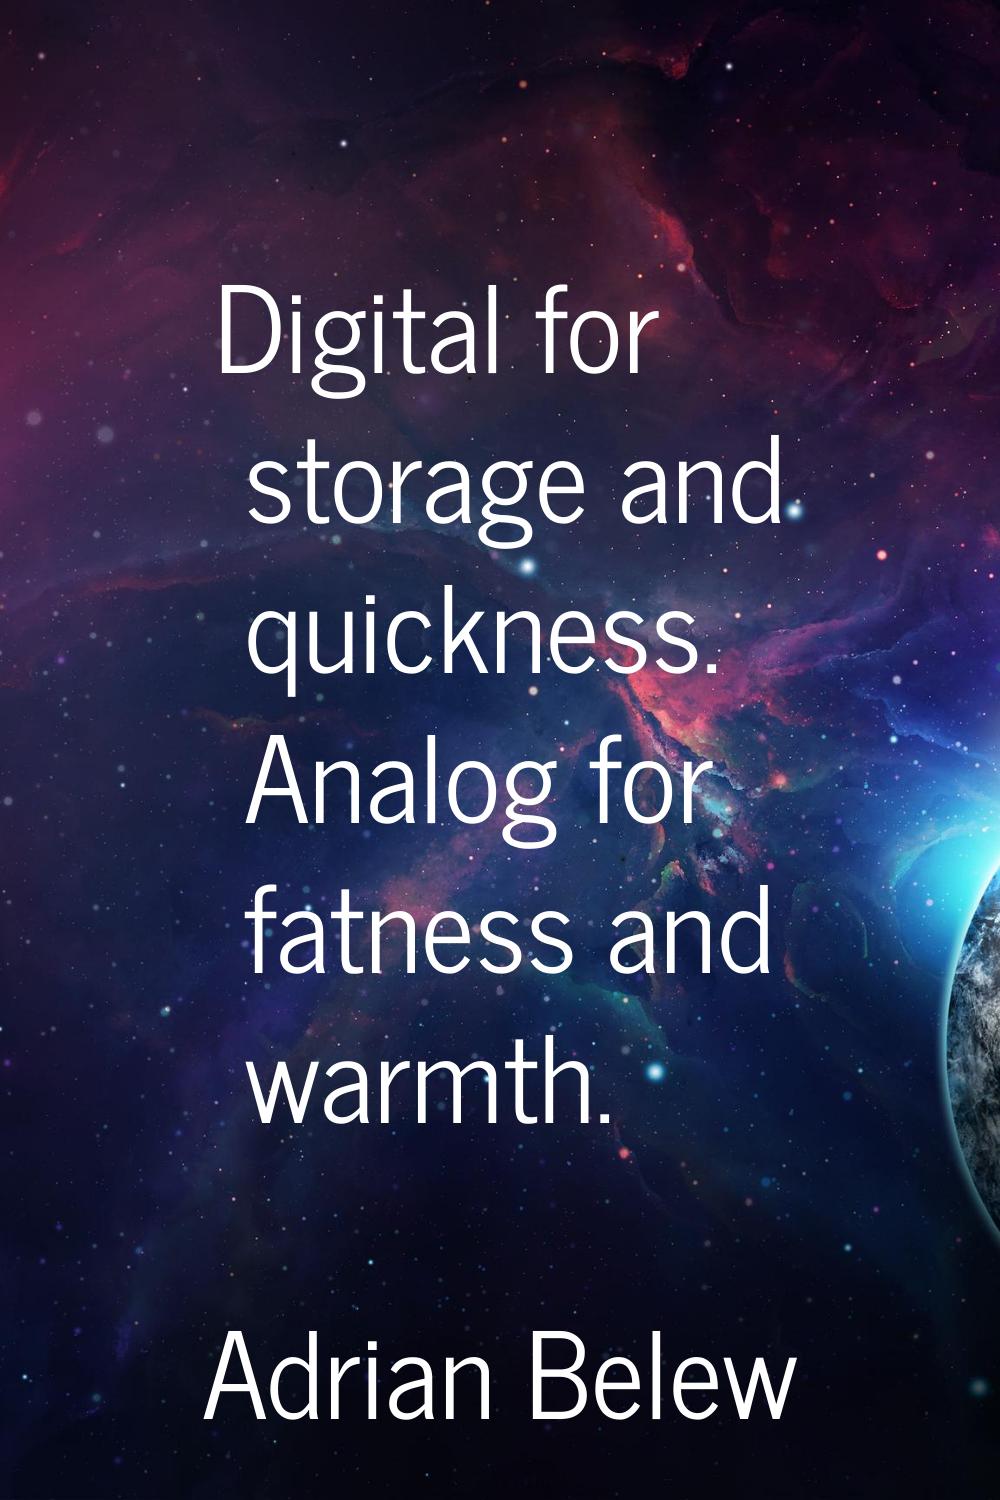 Digital for storage and quickness. Analog for fatness and warmth.